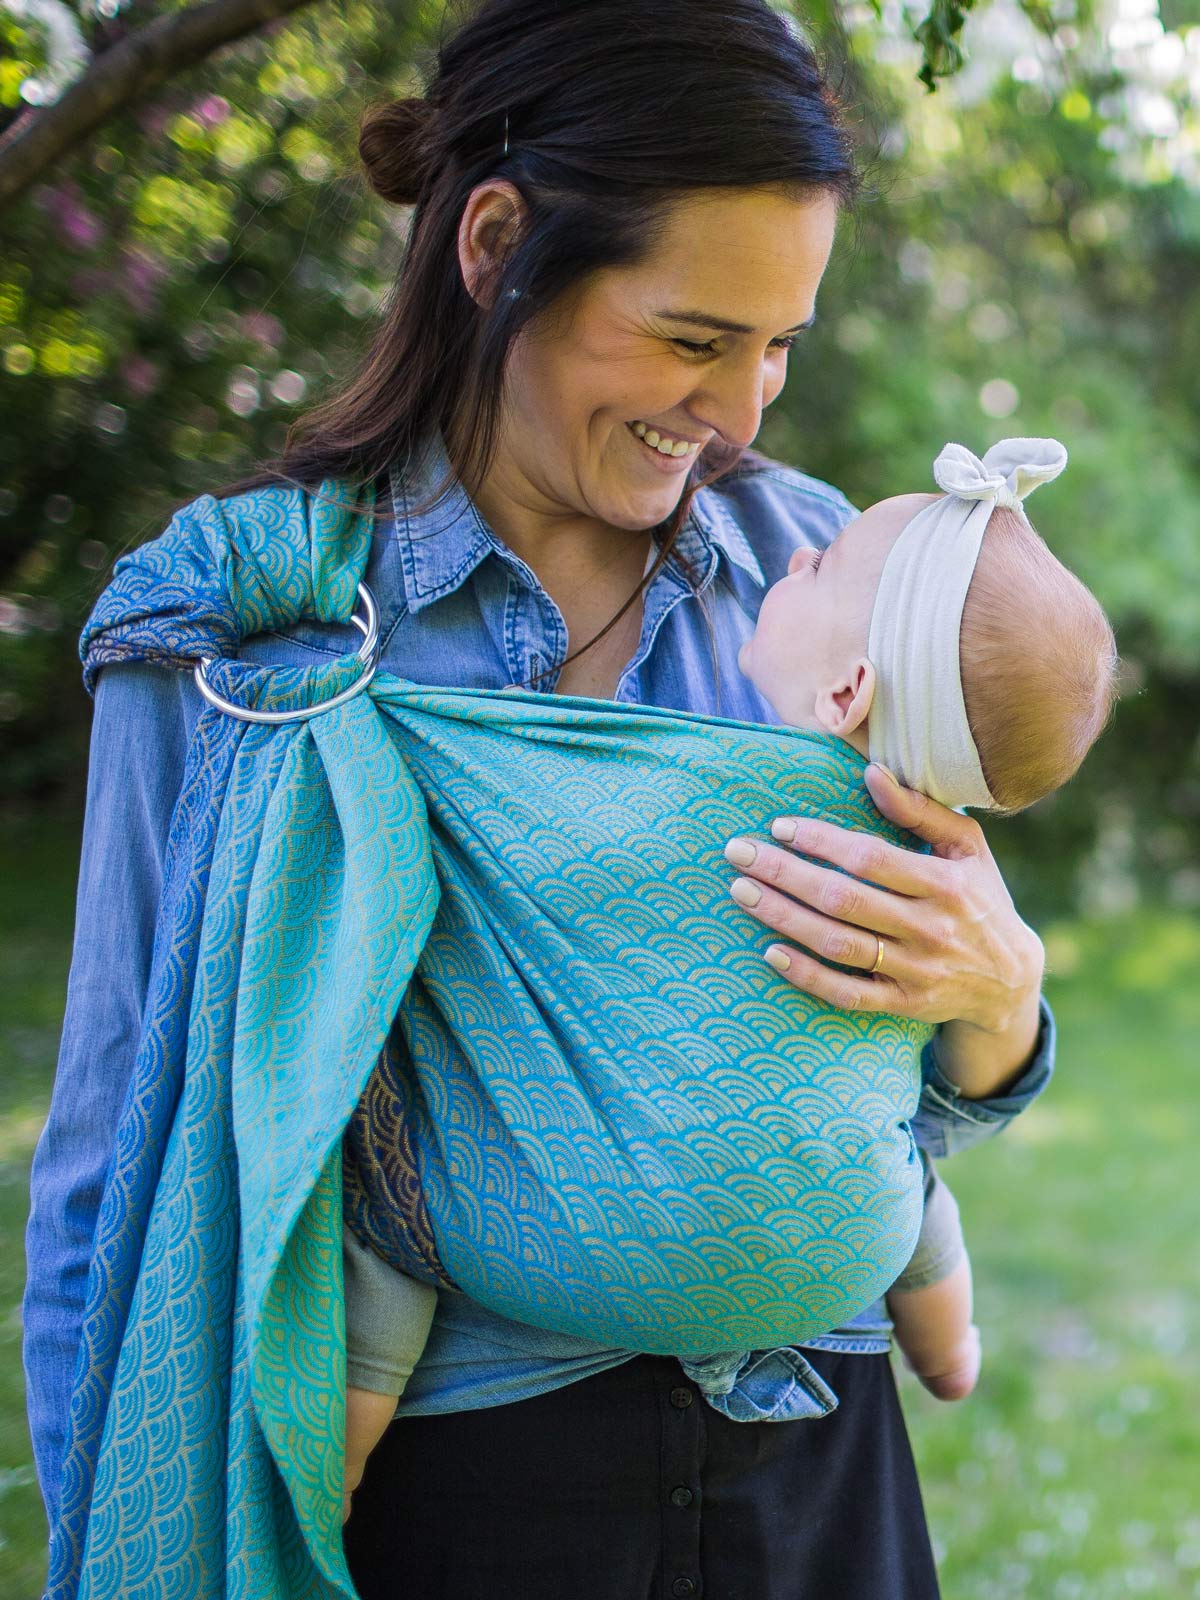 The 7 Benefits of Baby Ring Sling - mamaway Maternity Blog & Advice